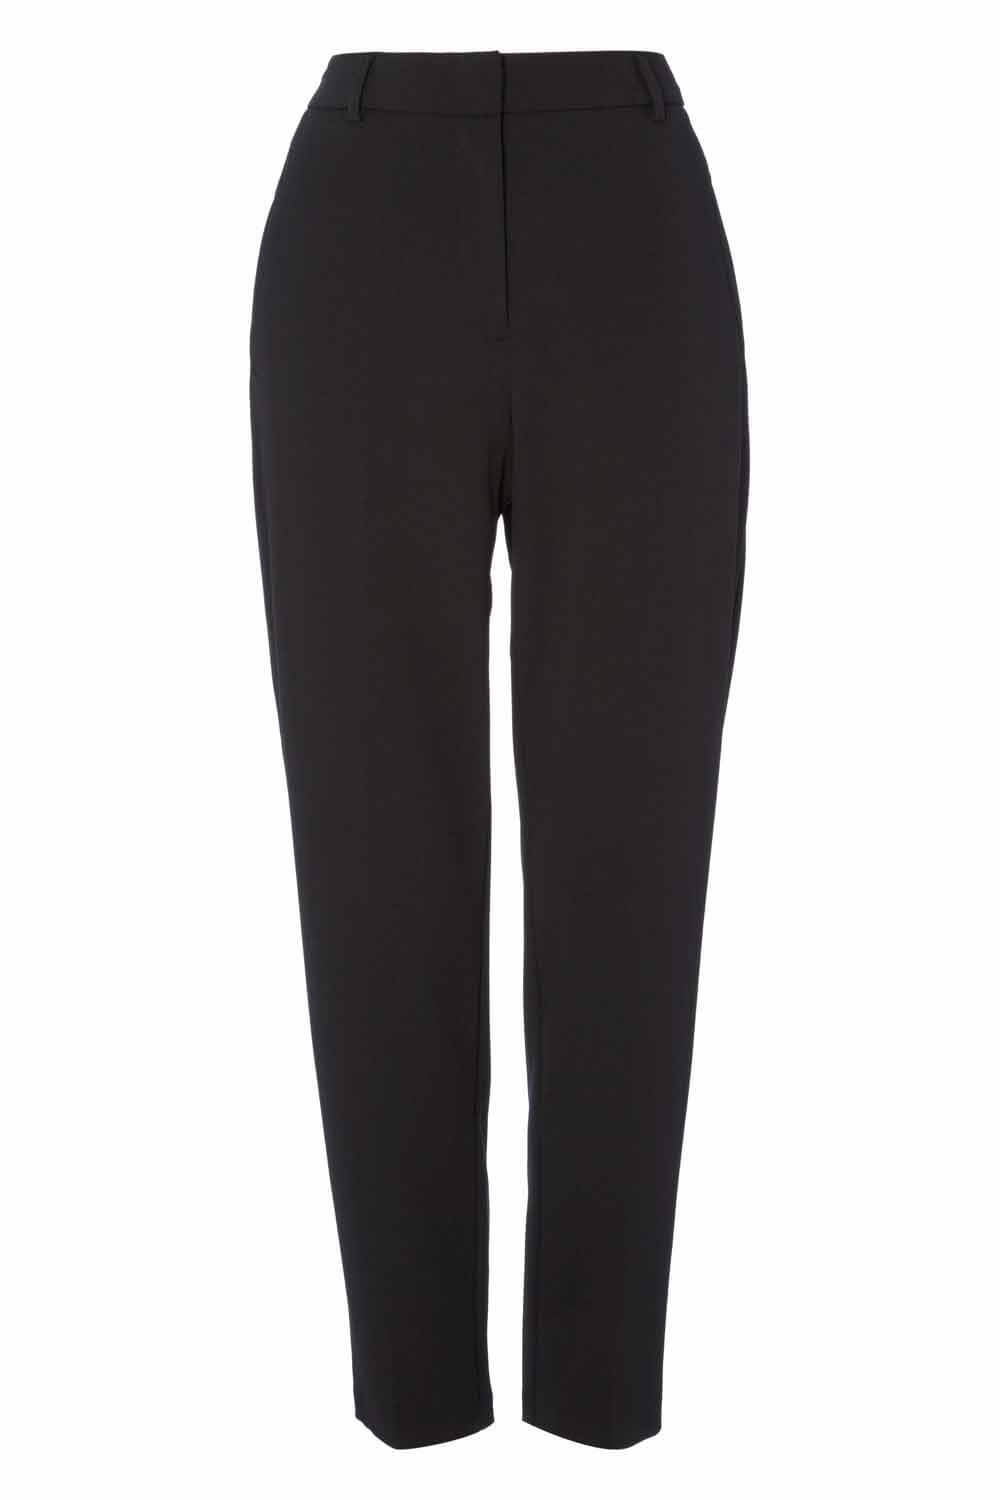 Black Tailored Straight Trouser, Image 5 of 5